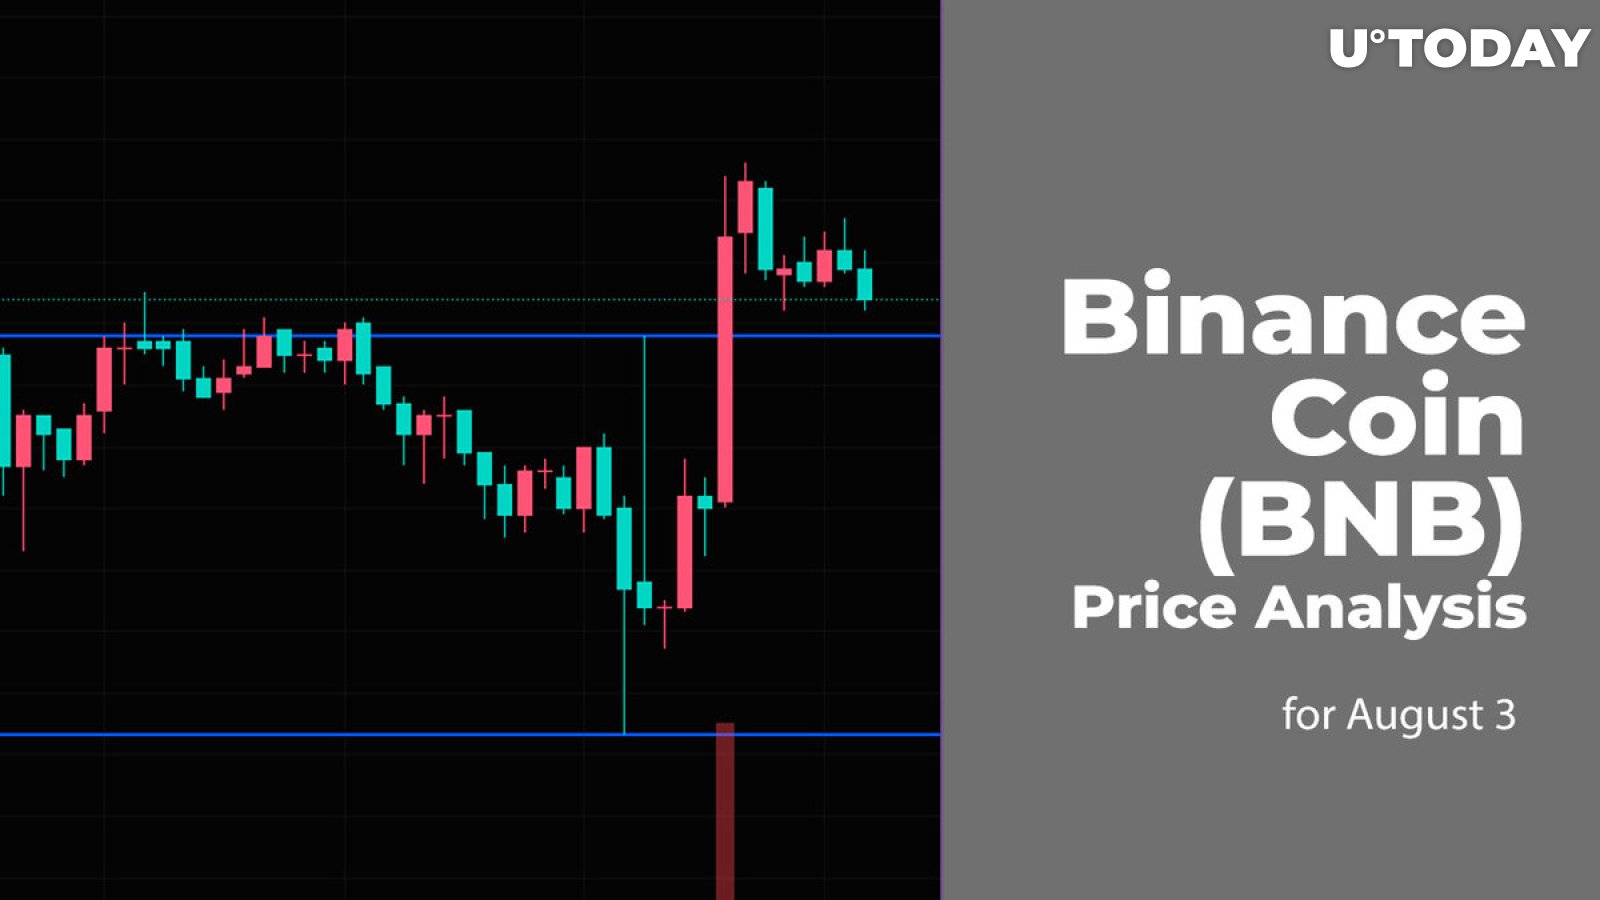 Binance Coin (BNB) Price Analysis for August 3